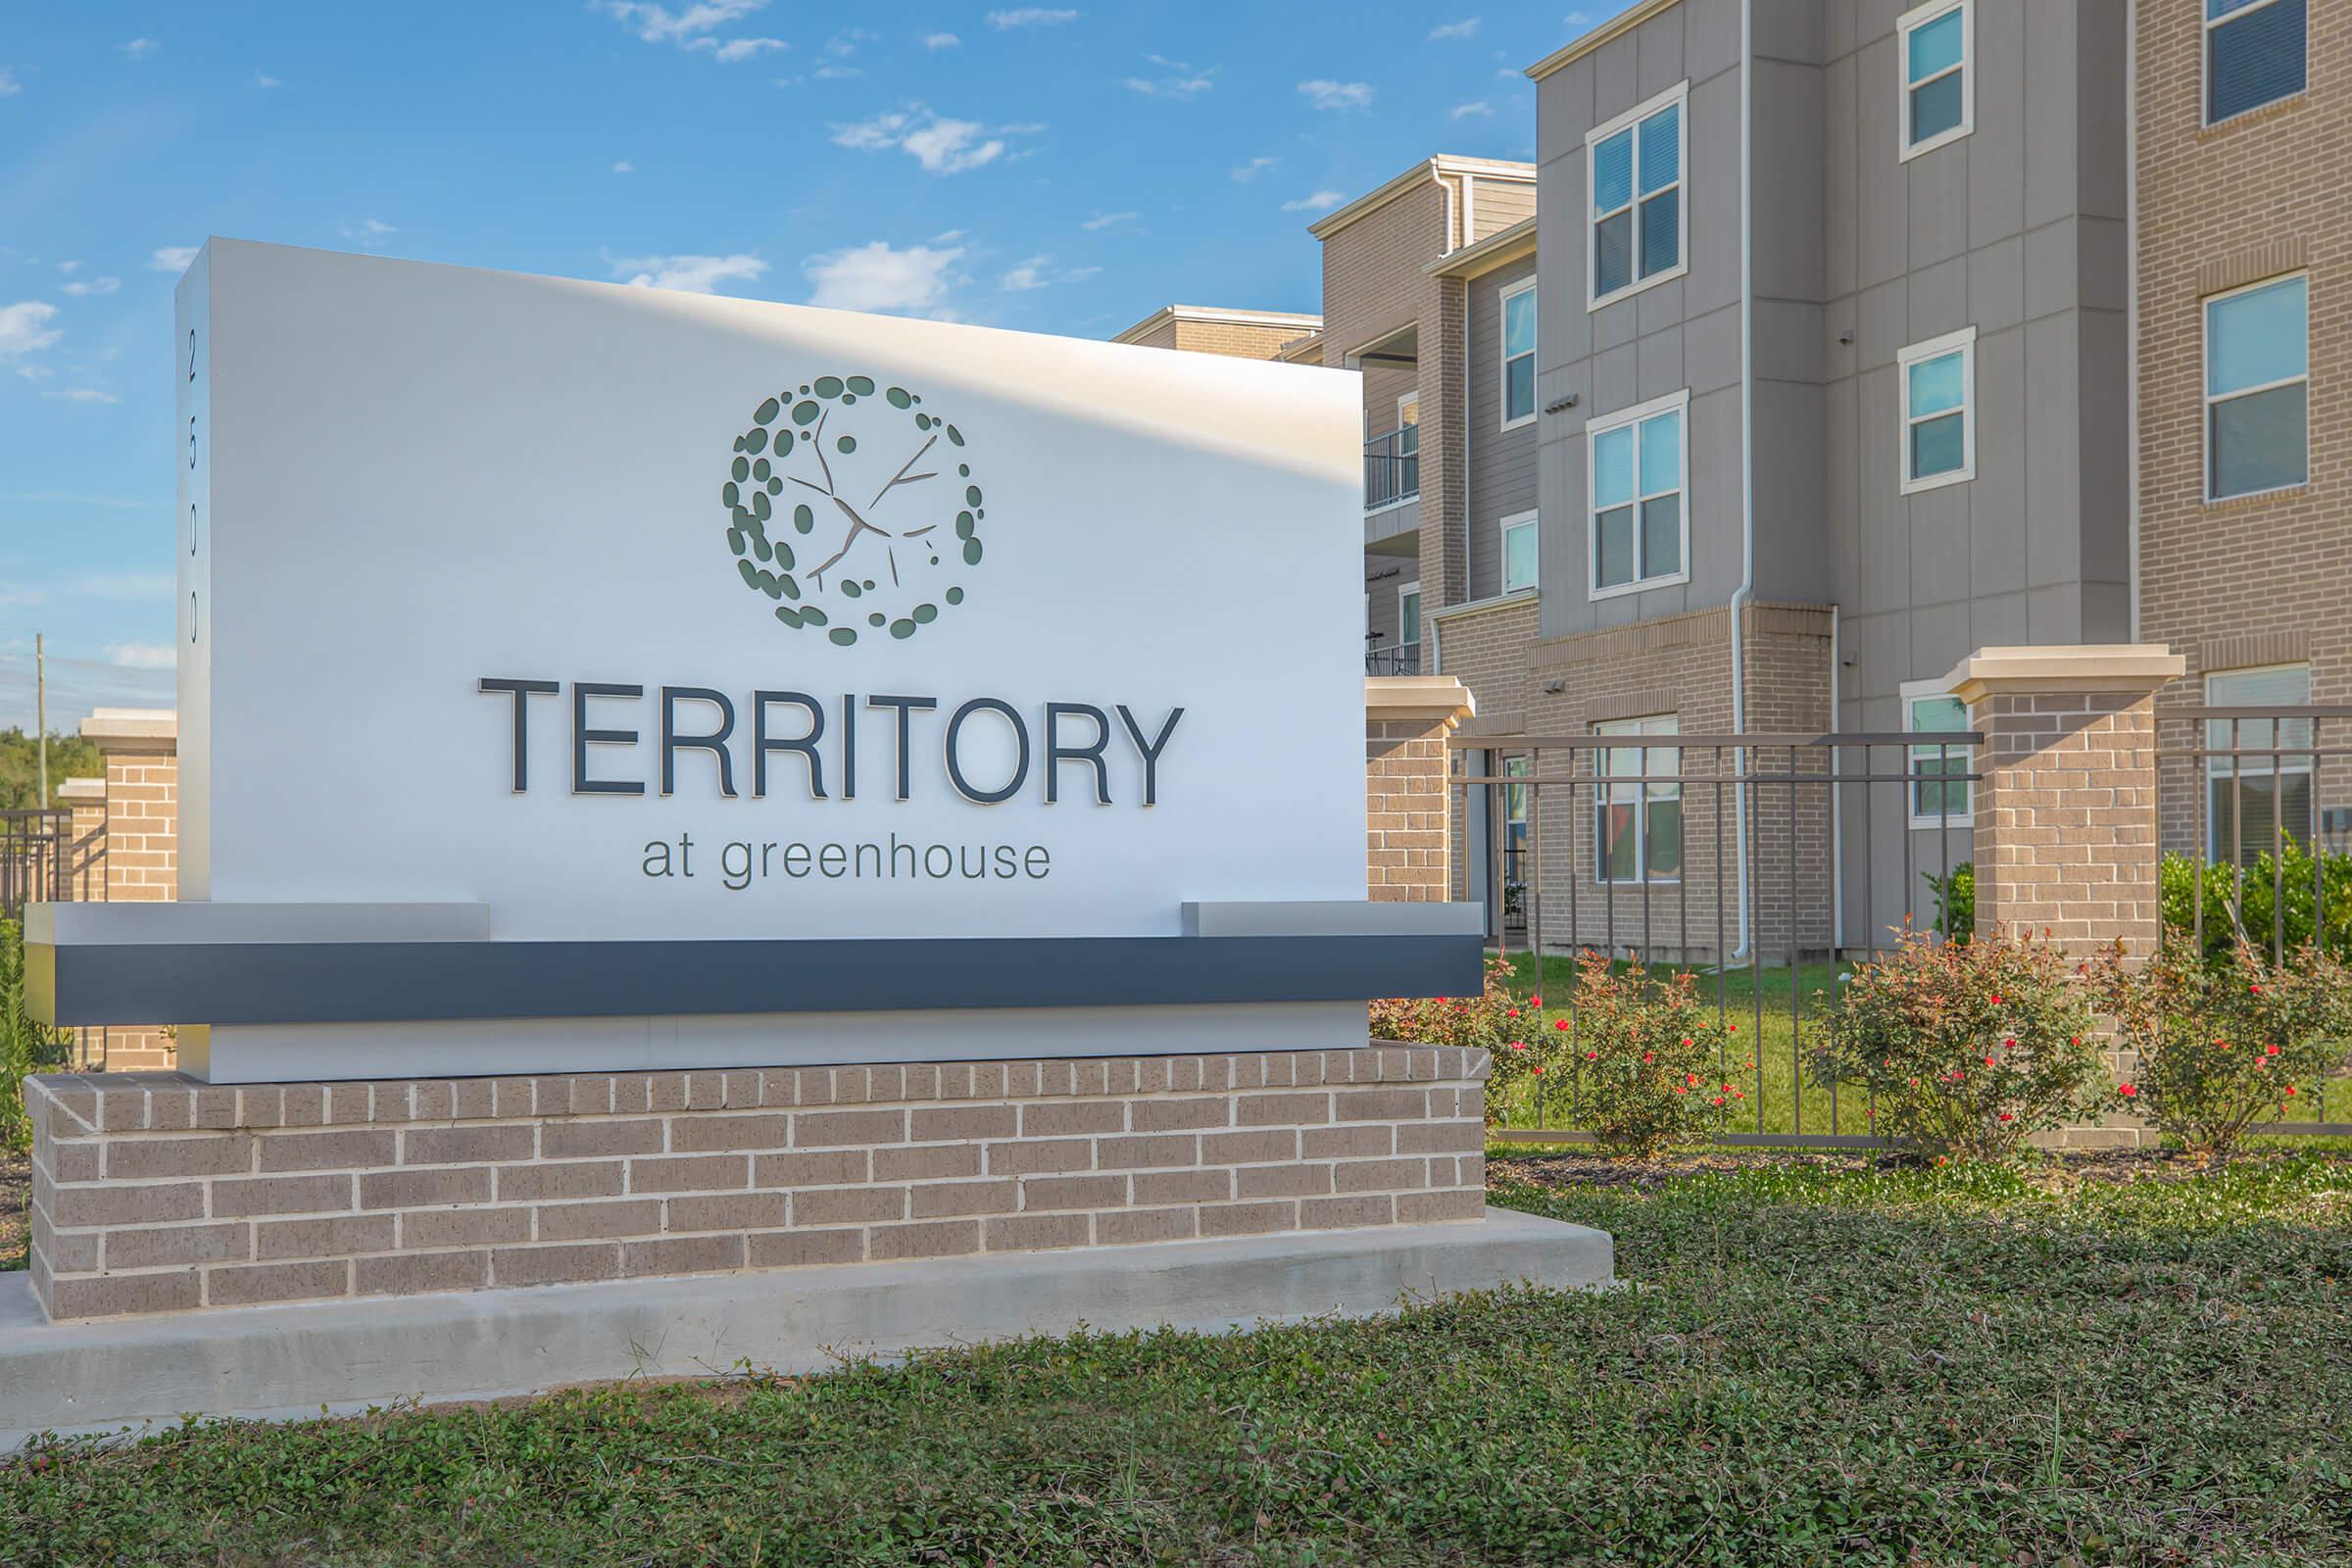 HOUSTON LIVING AT TERRITORY AT GREENHOUSE